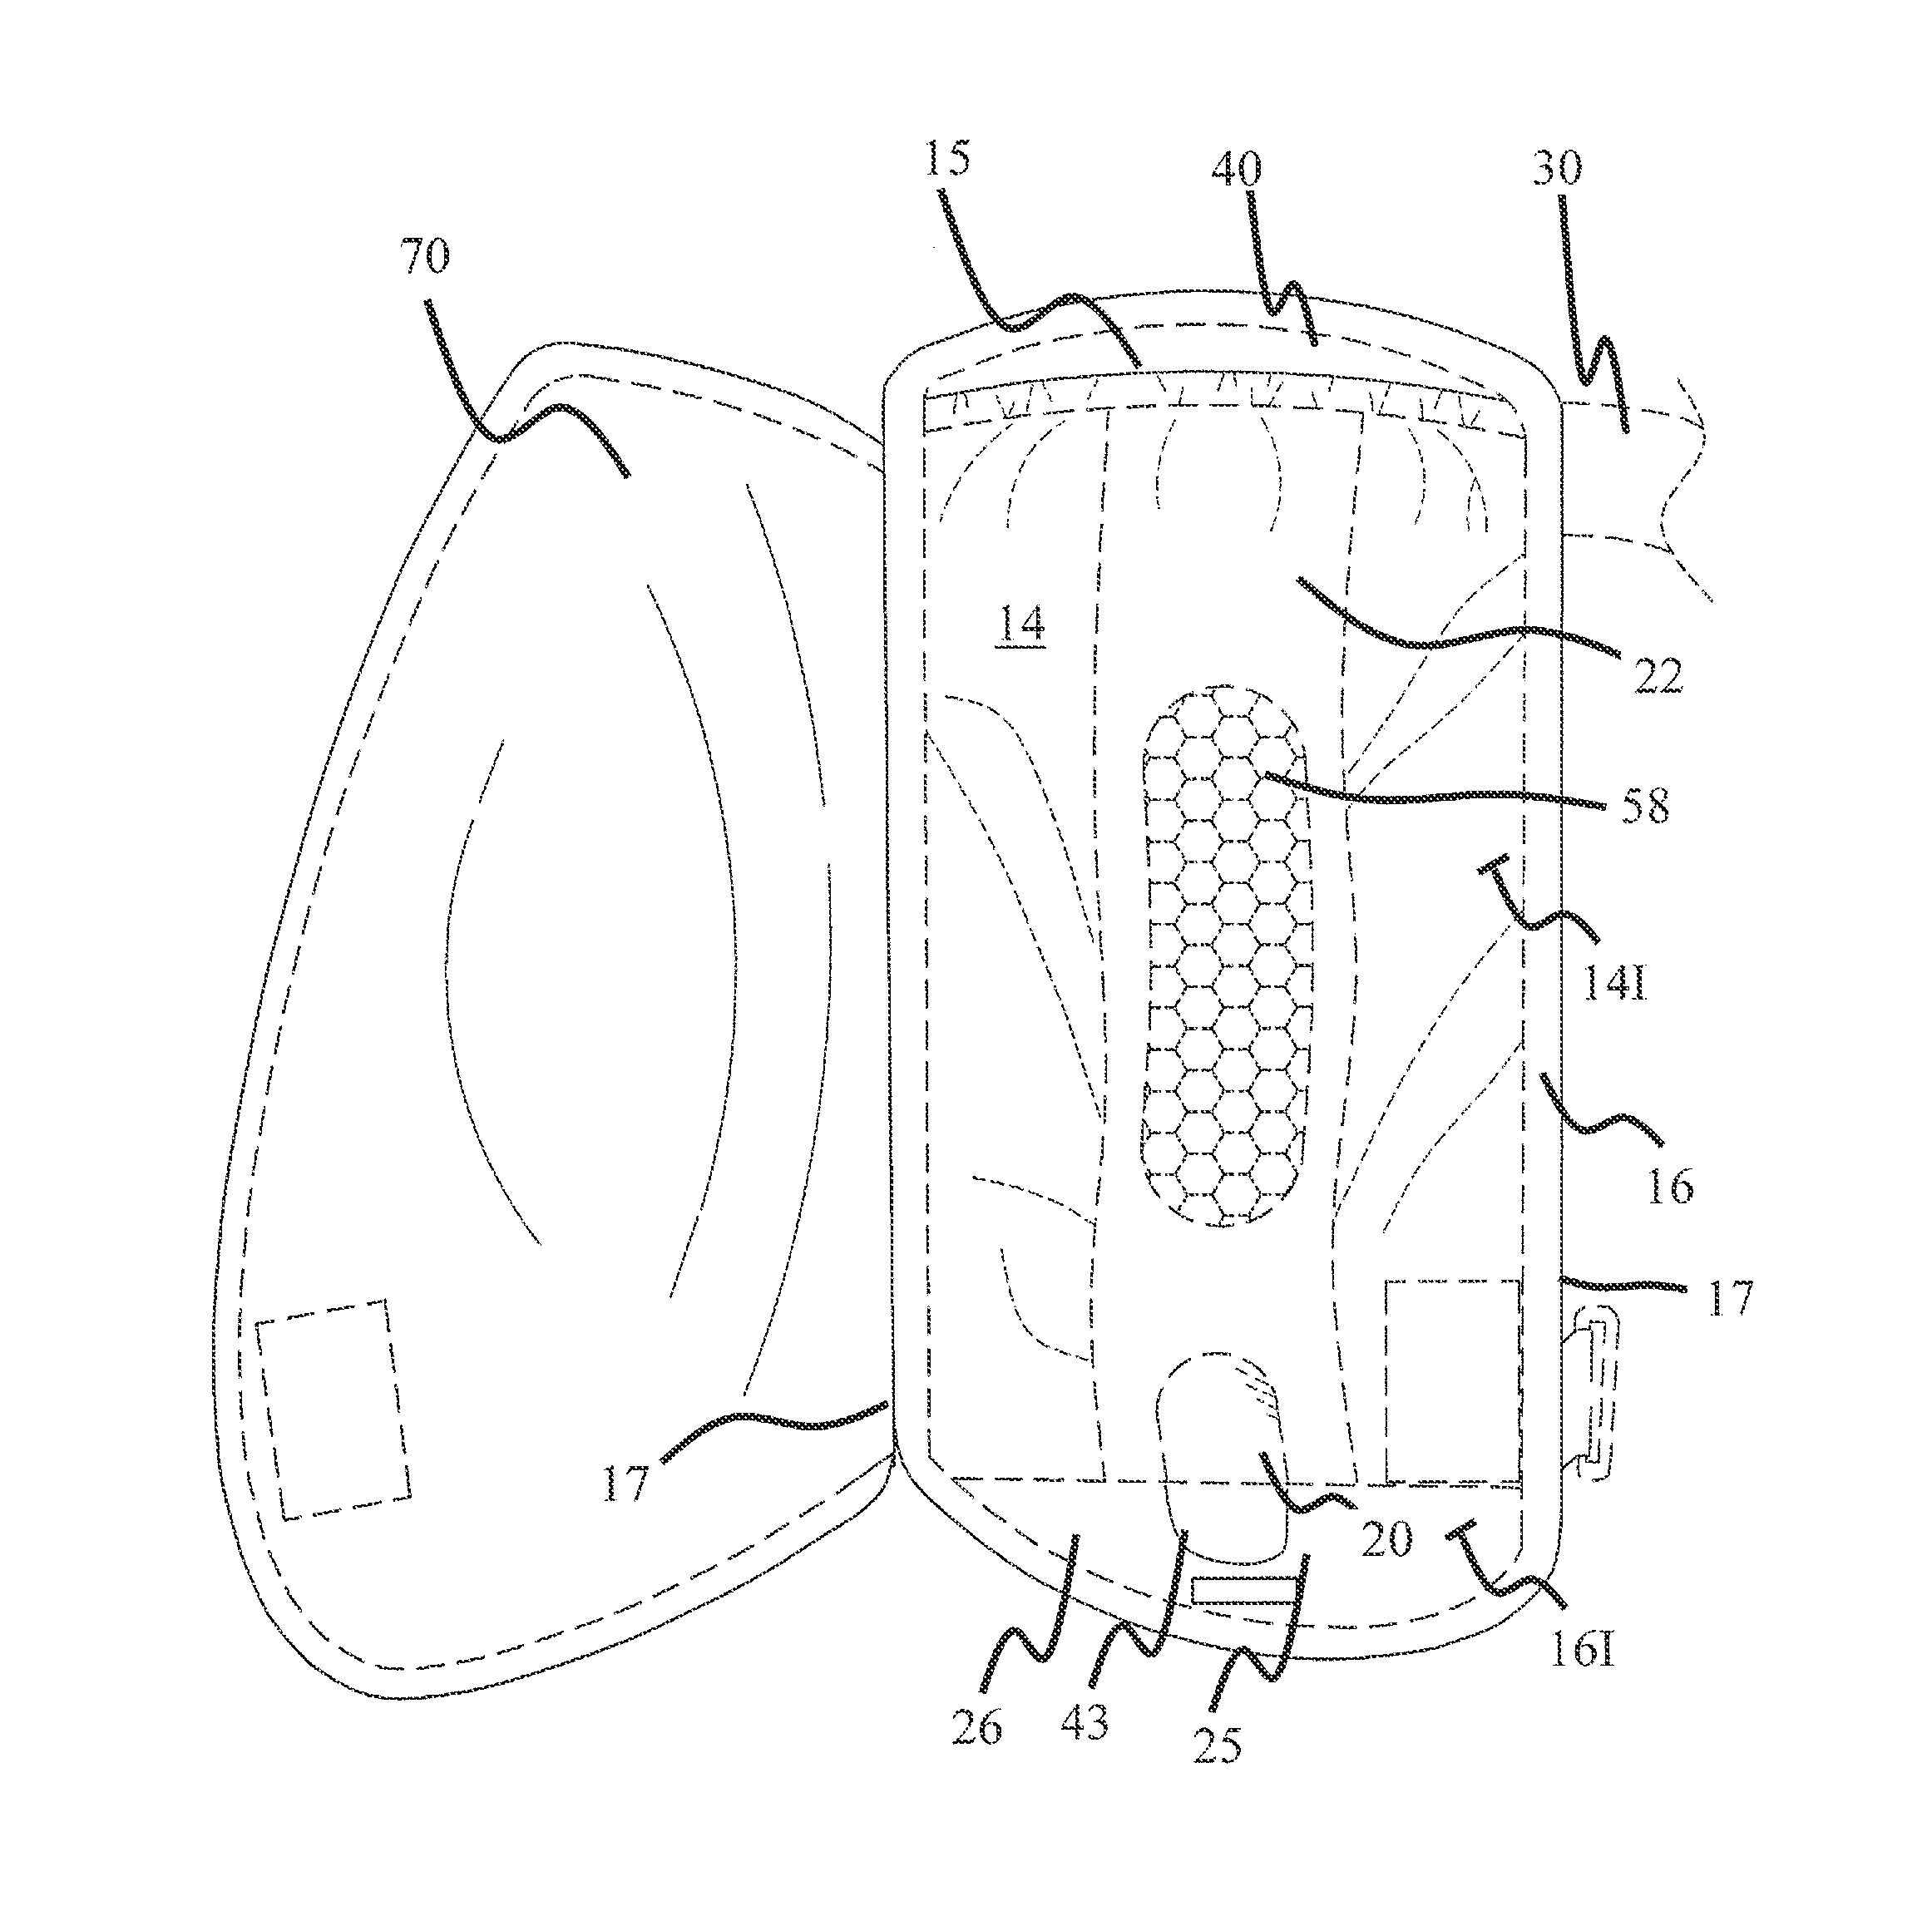 Devices for concealing a urine collection bag and that provide access to monitor and manipulate a urine collection bag therein